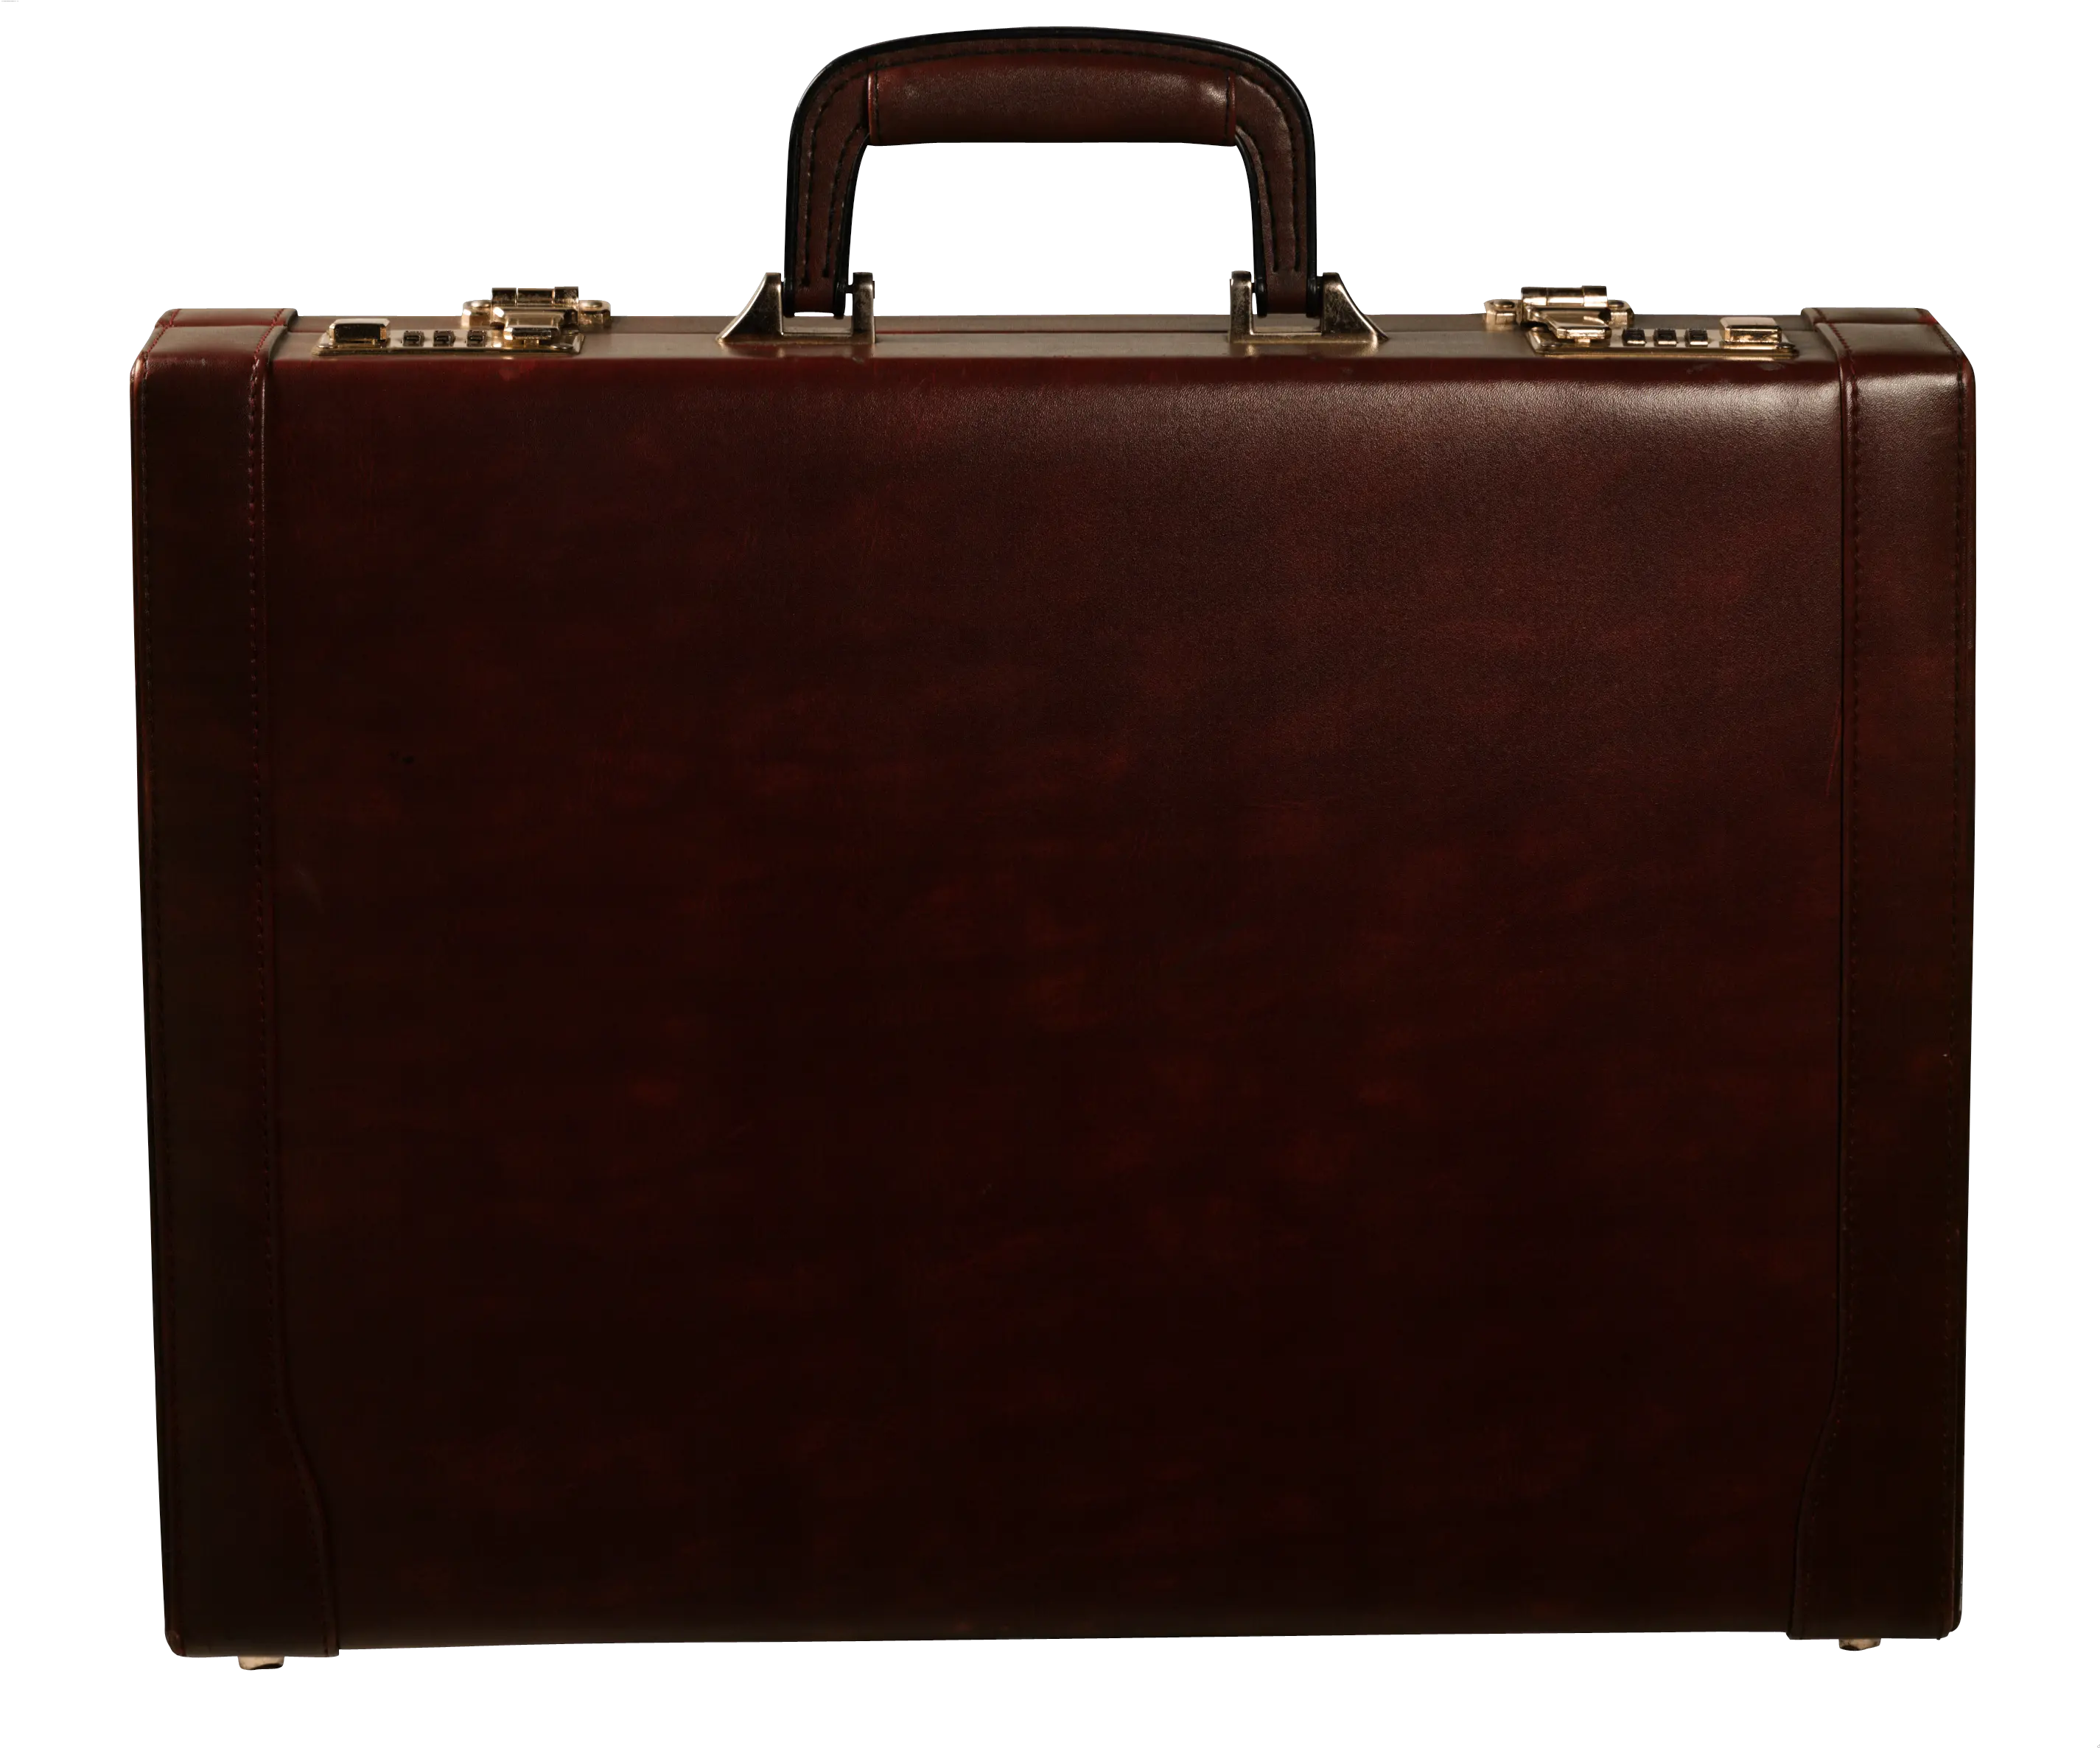 Suitcase Png Images Free Download